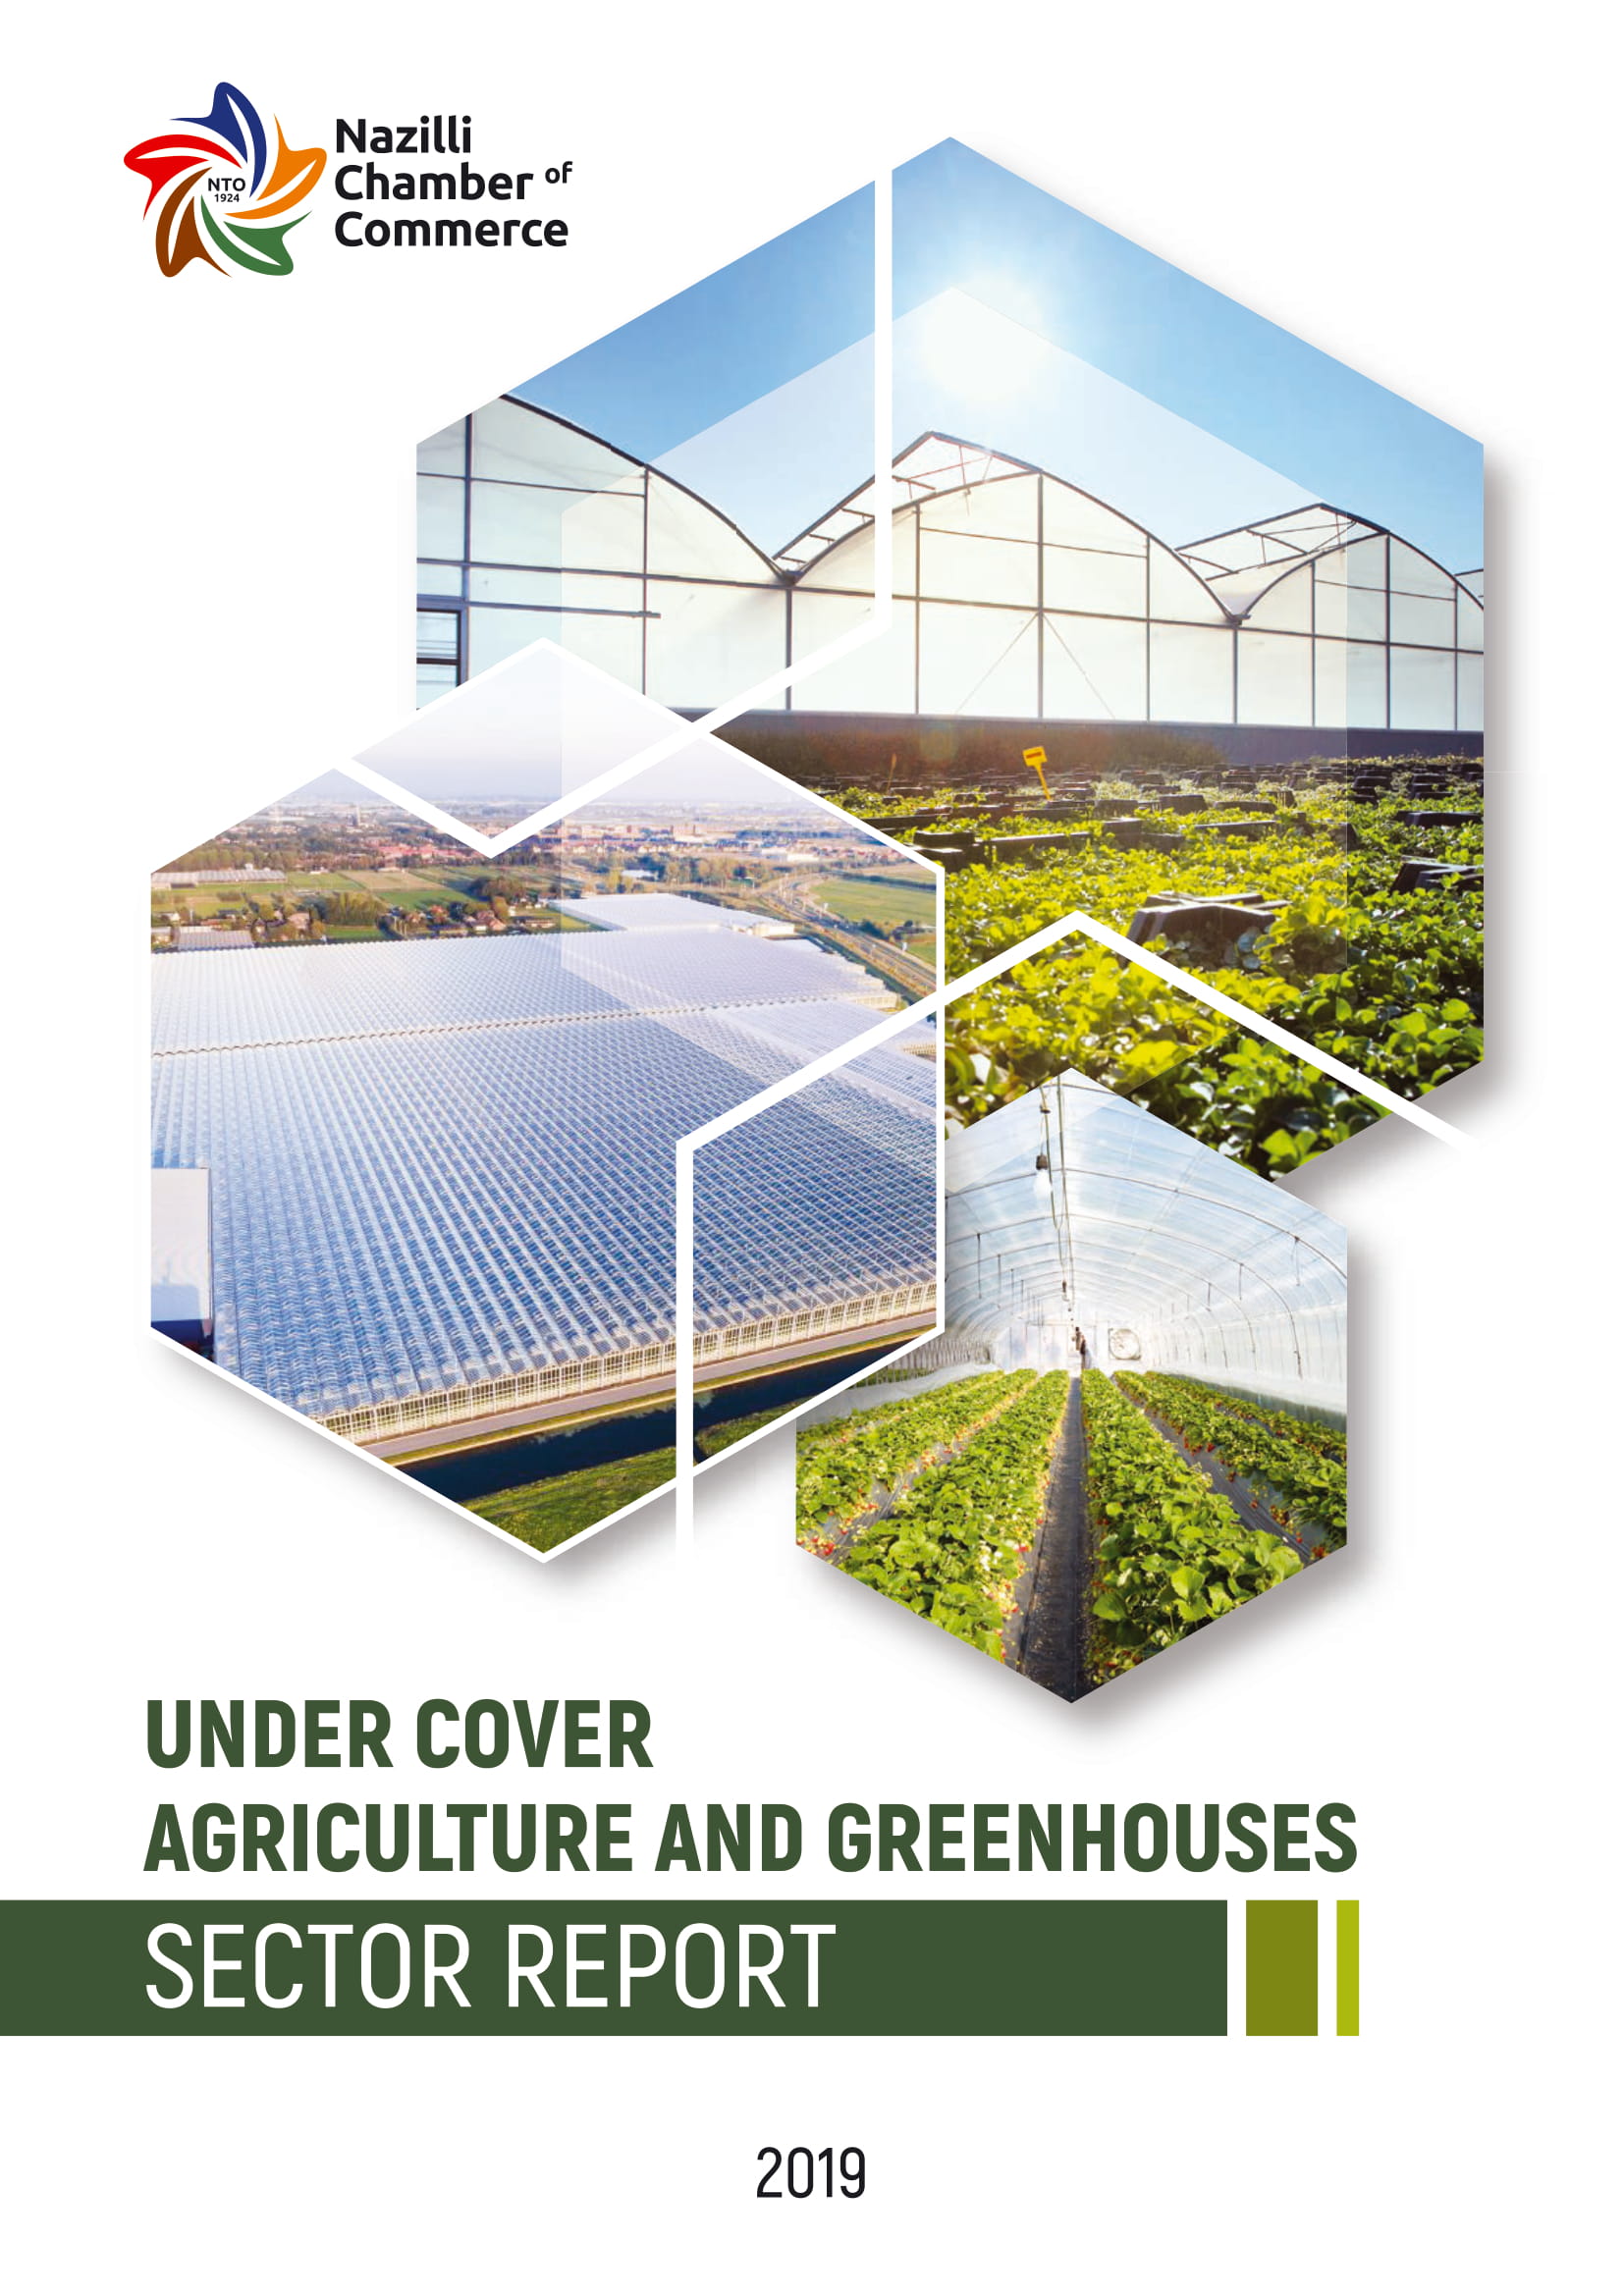 under-ccover-agriculture-and-greenhouses-sector-report-01